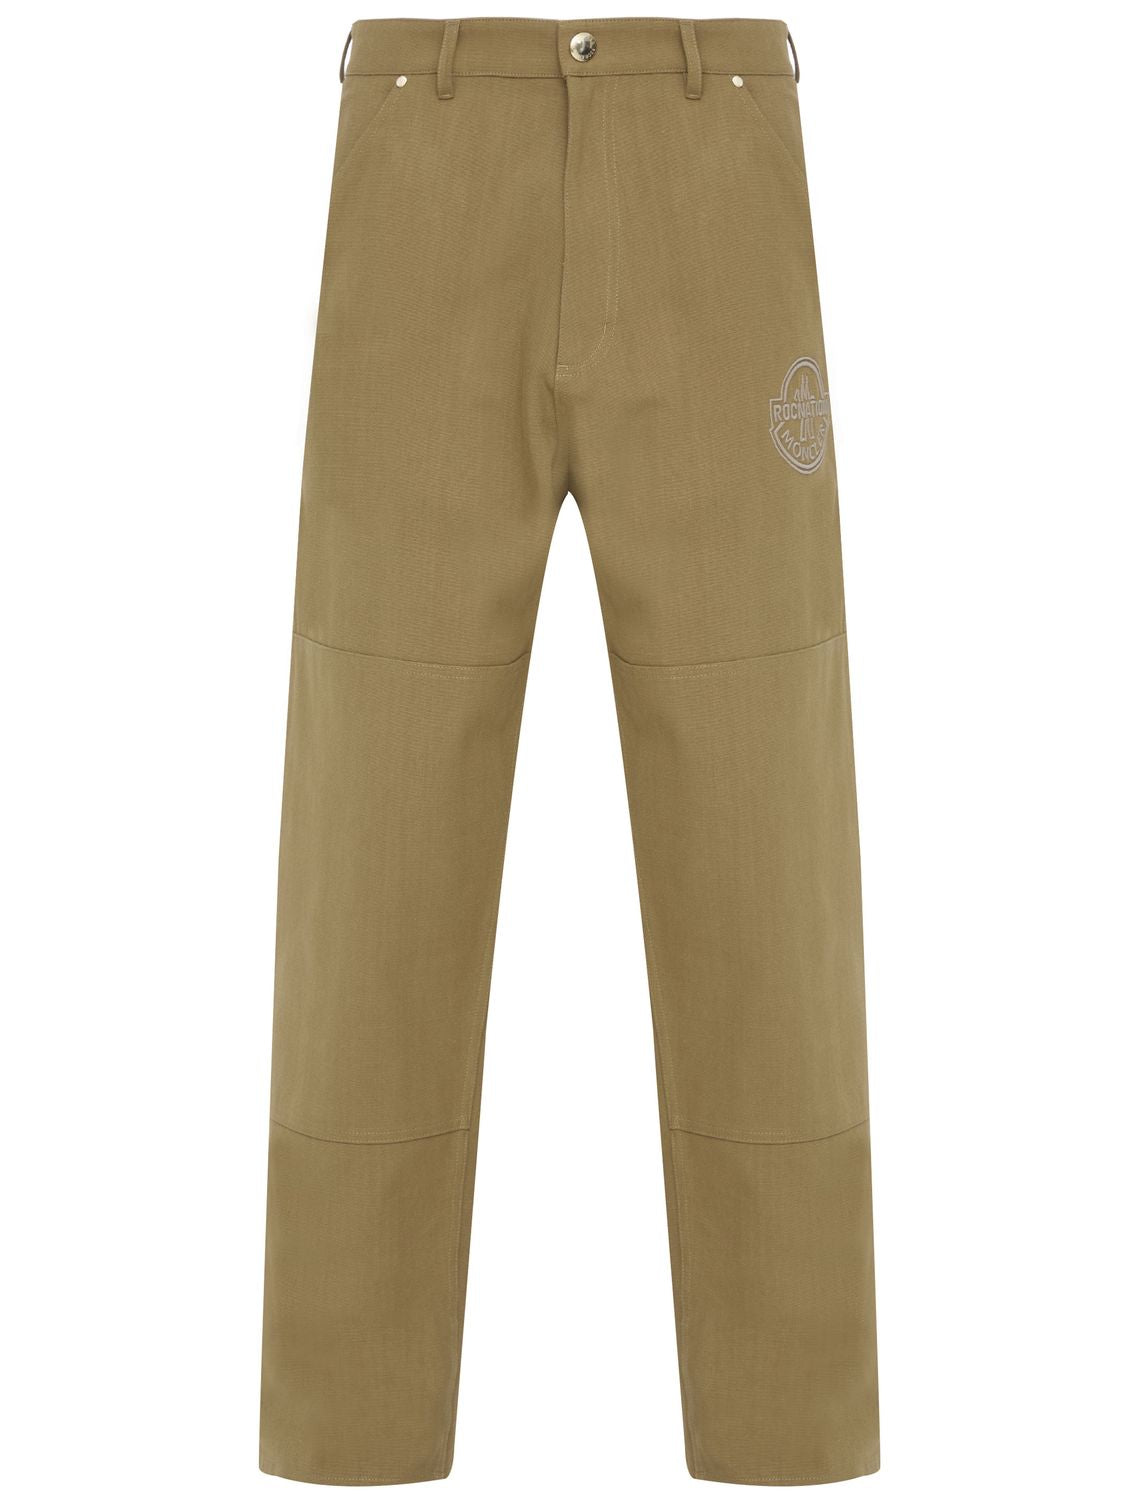 MONCLER X ROC NATION BY JAY Z Men's Beige Cotton Canvas Trousers with Embroidered Logo and Multiple Pockets